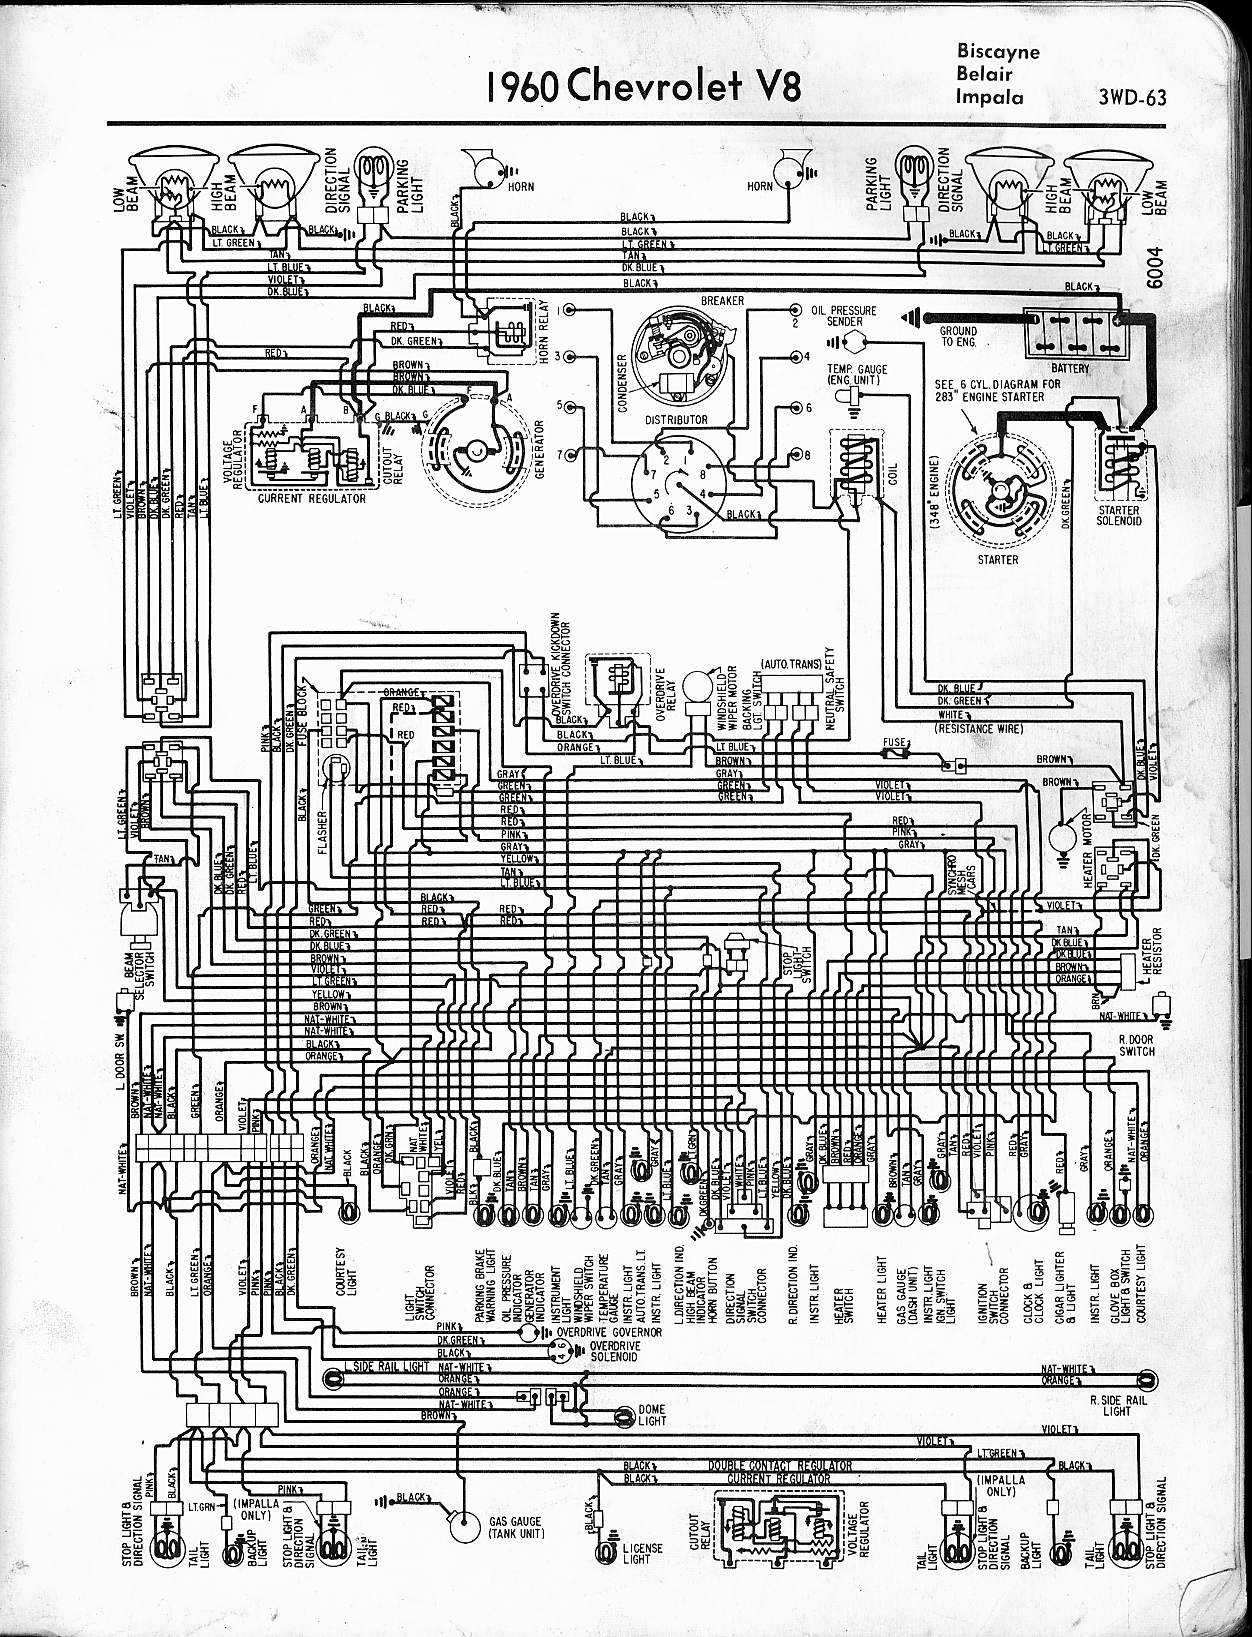 Wiring Diagram On 76 Chevy Truck 1972 Chevy C10 Pickup Truck Wiring